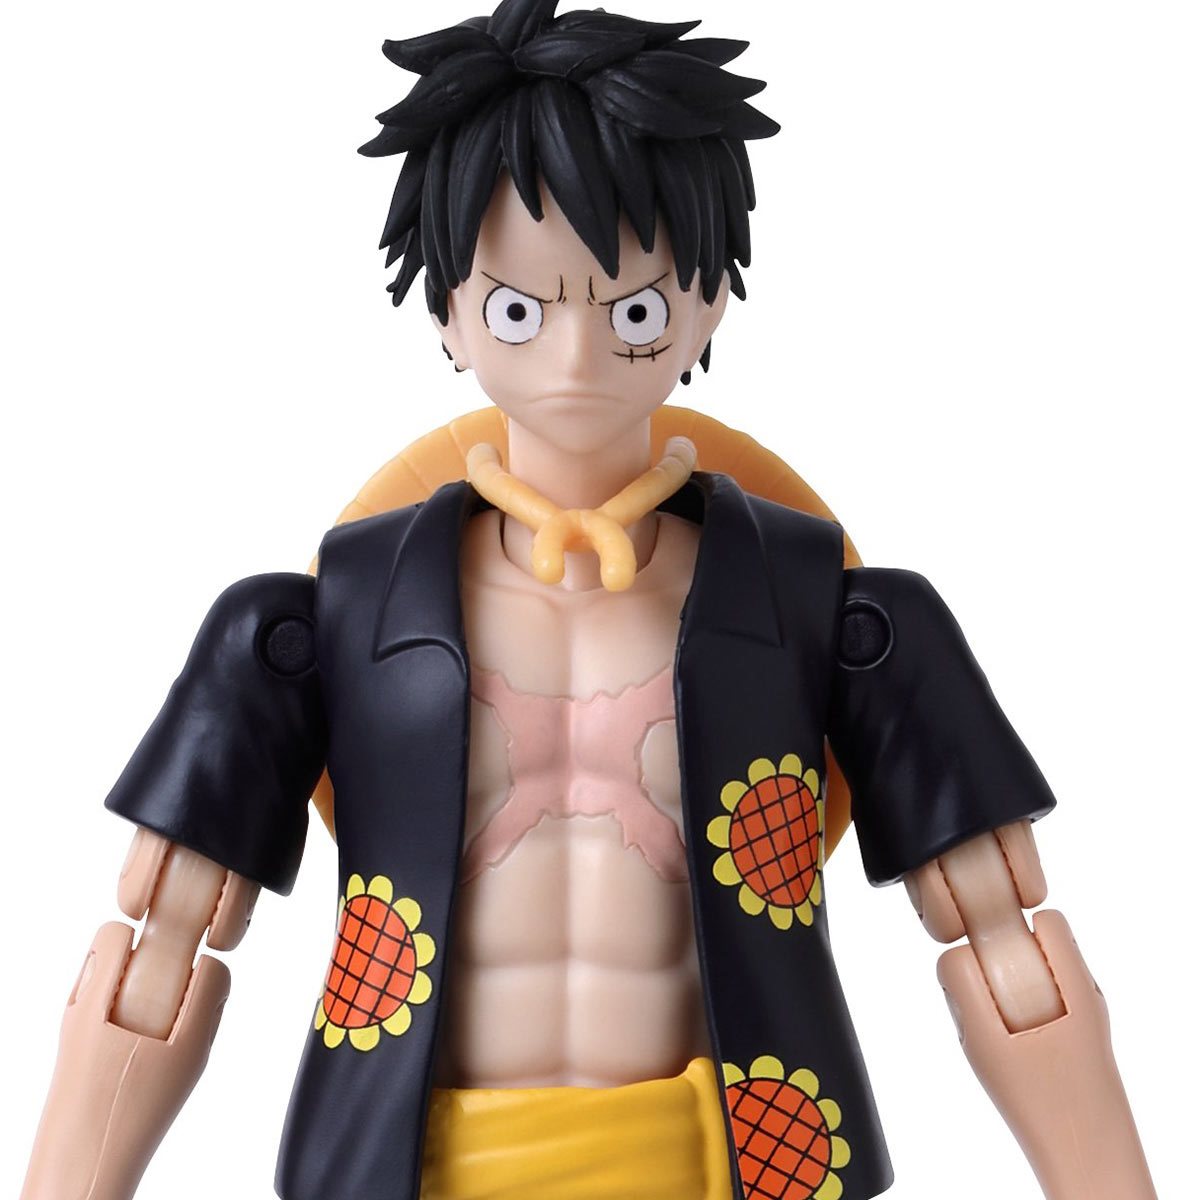 Anime Heroes Monkey D. Luffy Dressrosa for Sale in Gig Harbor, WA - OfferUp